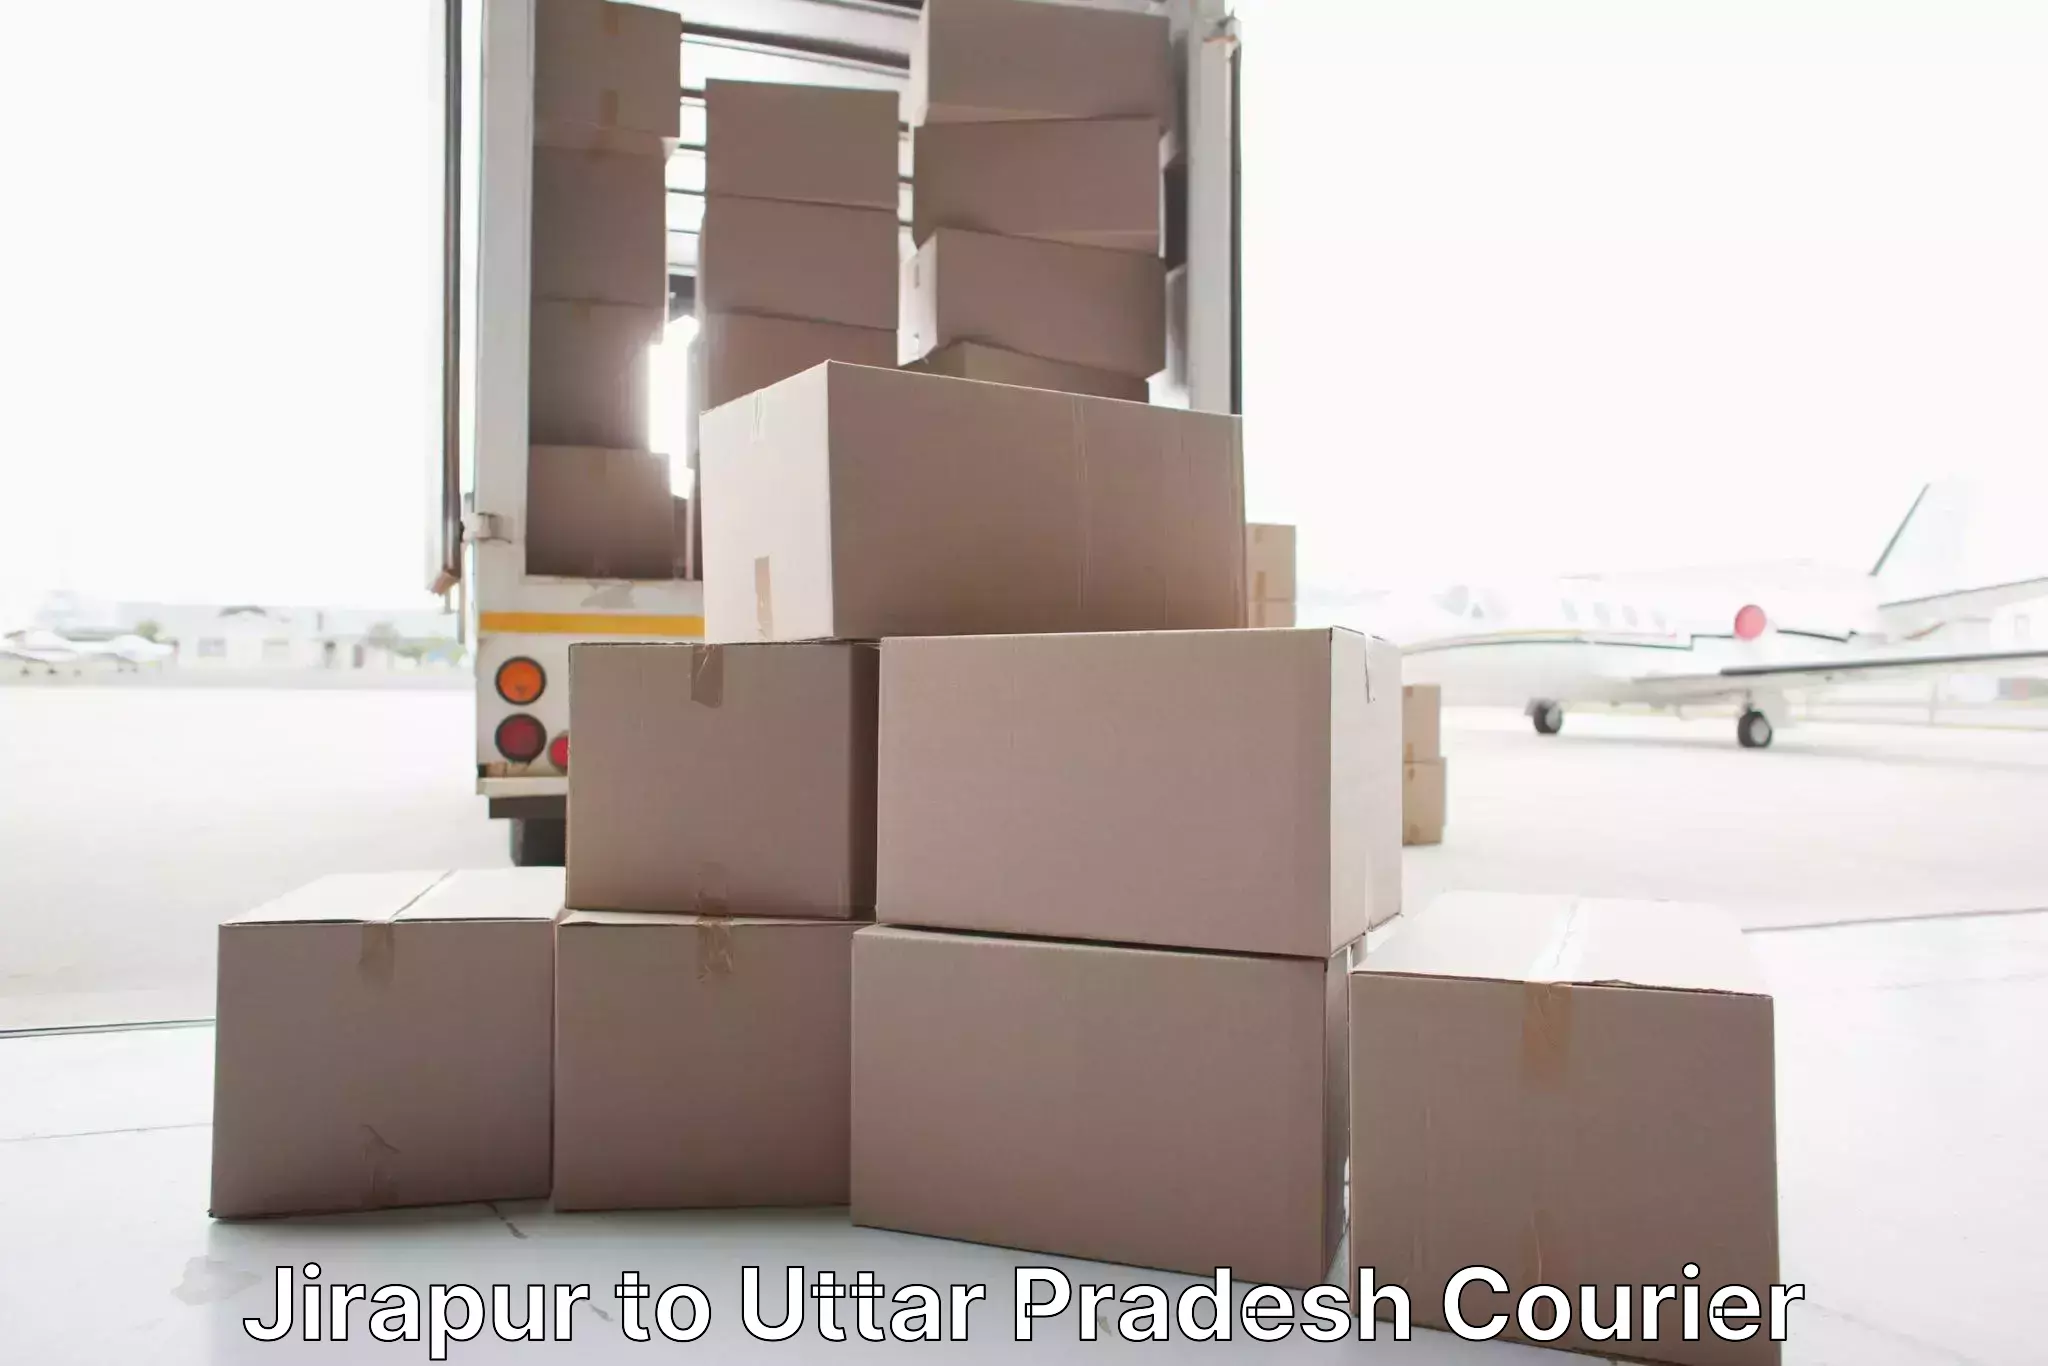 Customized relocation services Jirapur to Bahraich